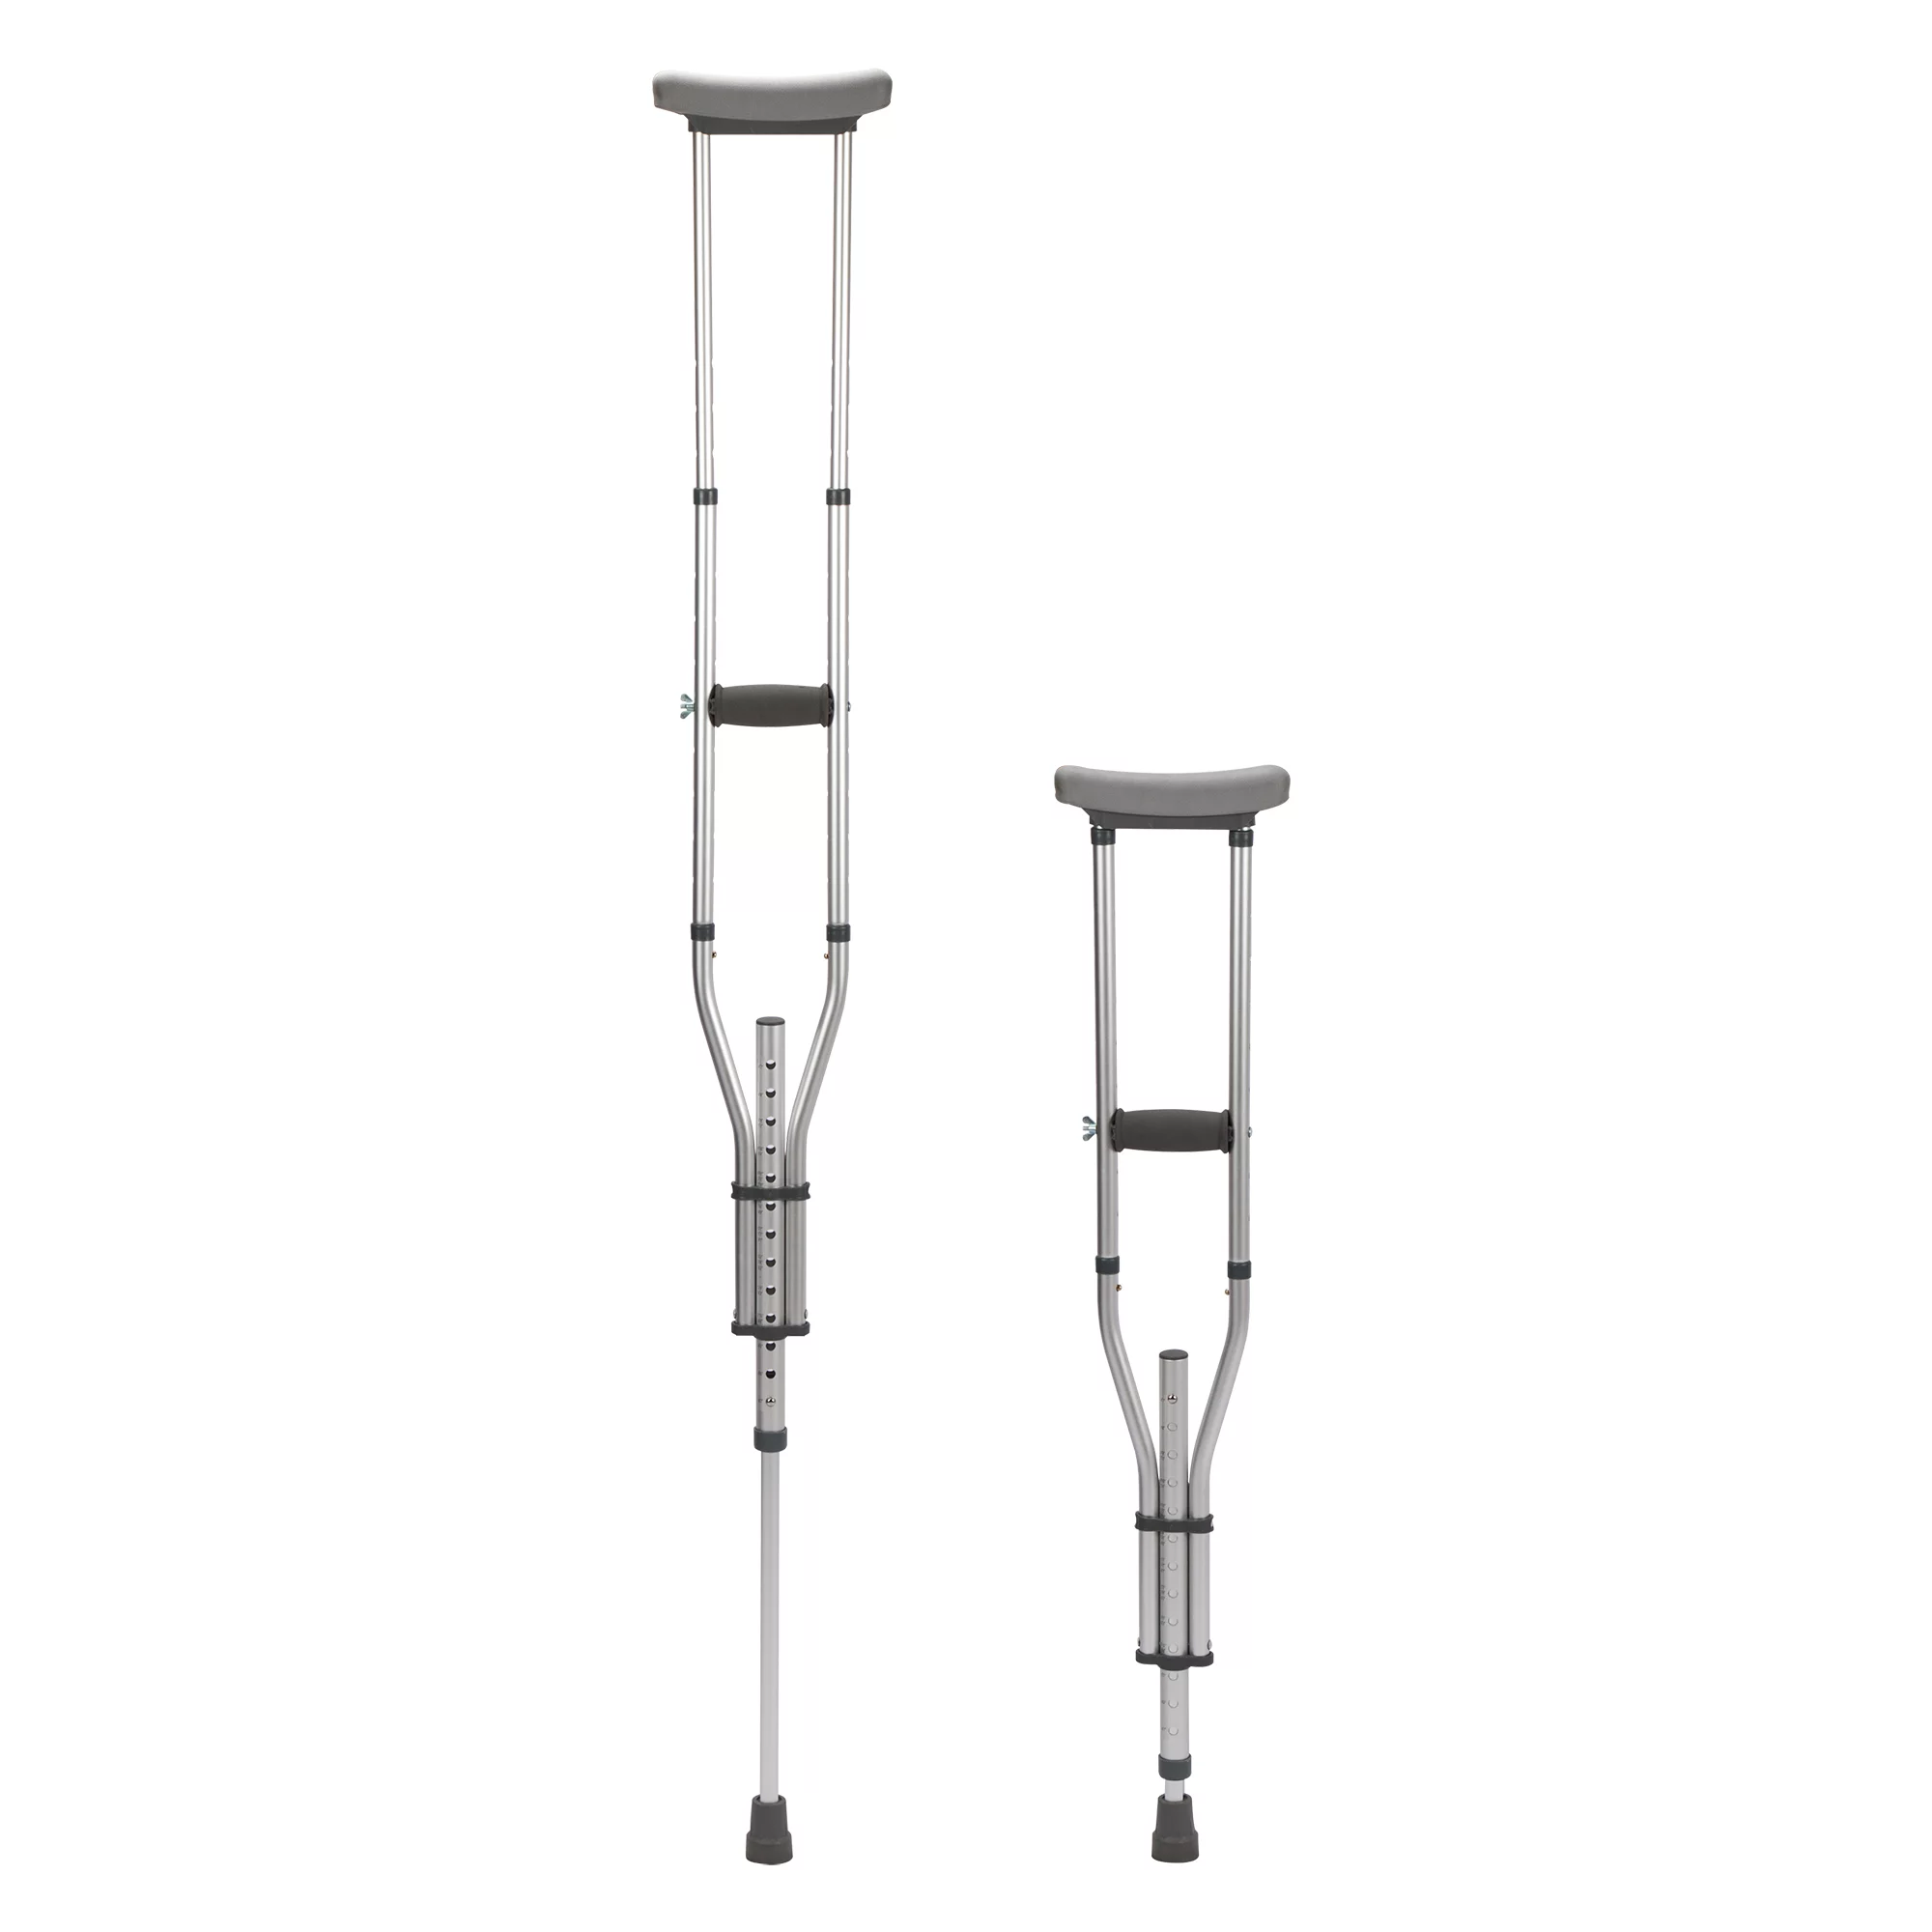 Detail Picture Of Crutches Nomer 36